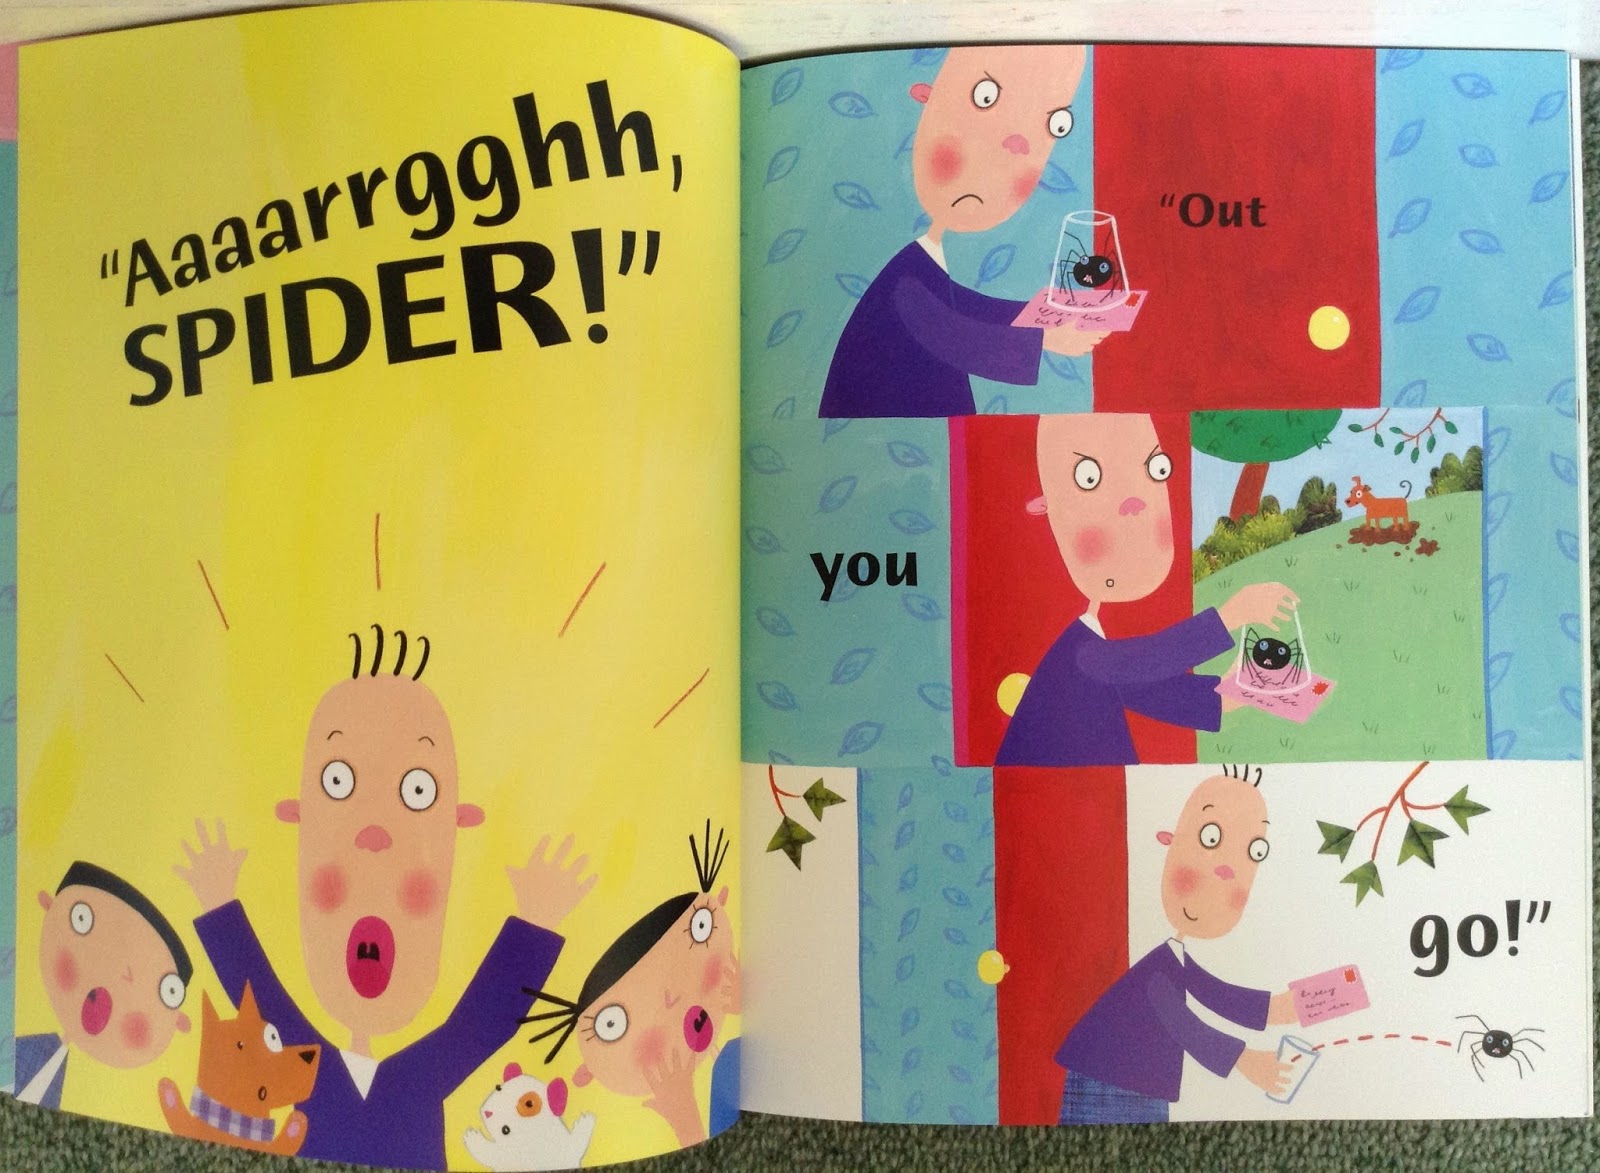 Reflections of a Crazy Library Lady: #365PictureBooks 25. Aaaarrgghh